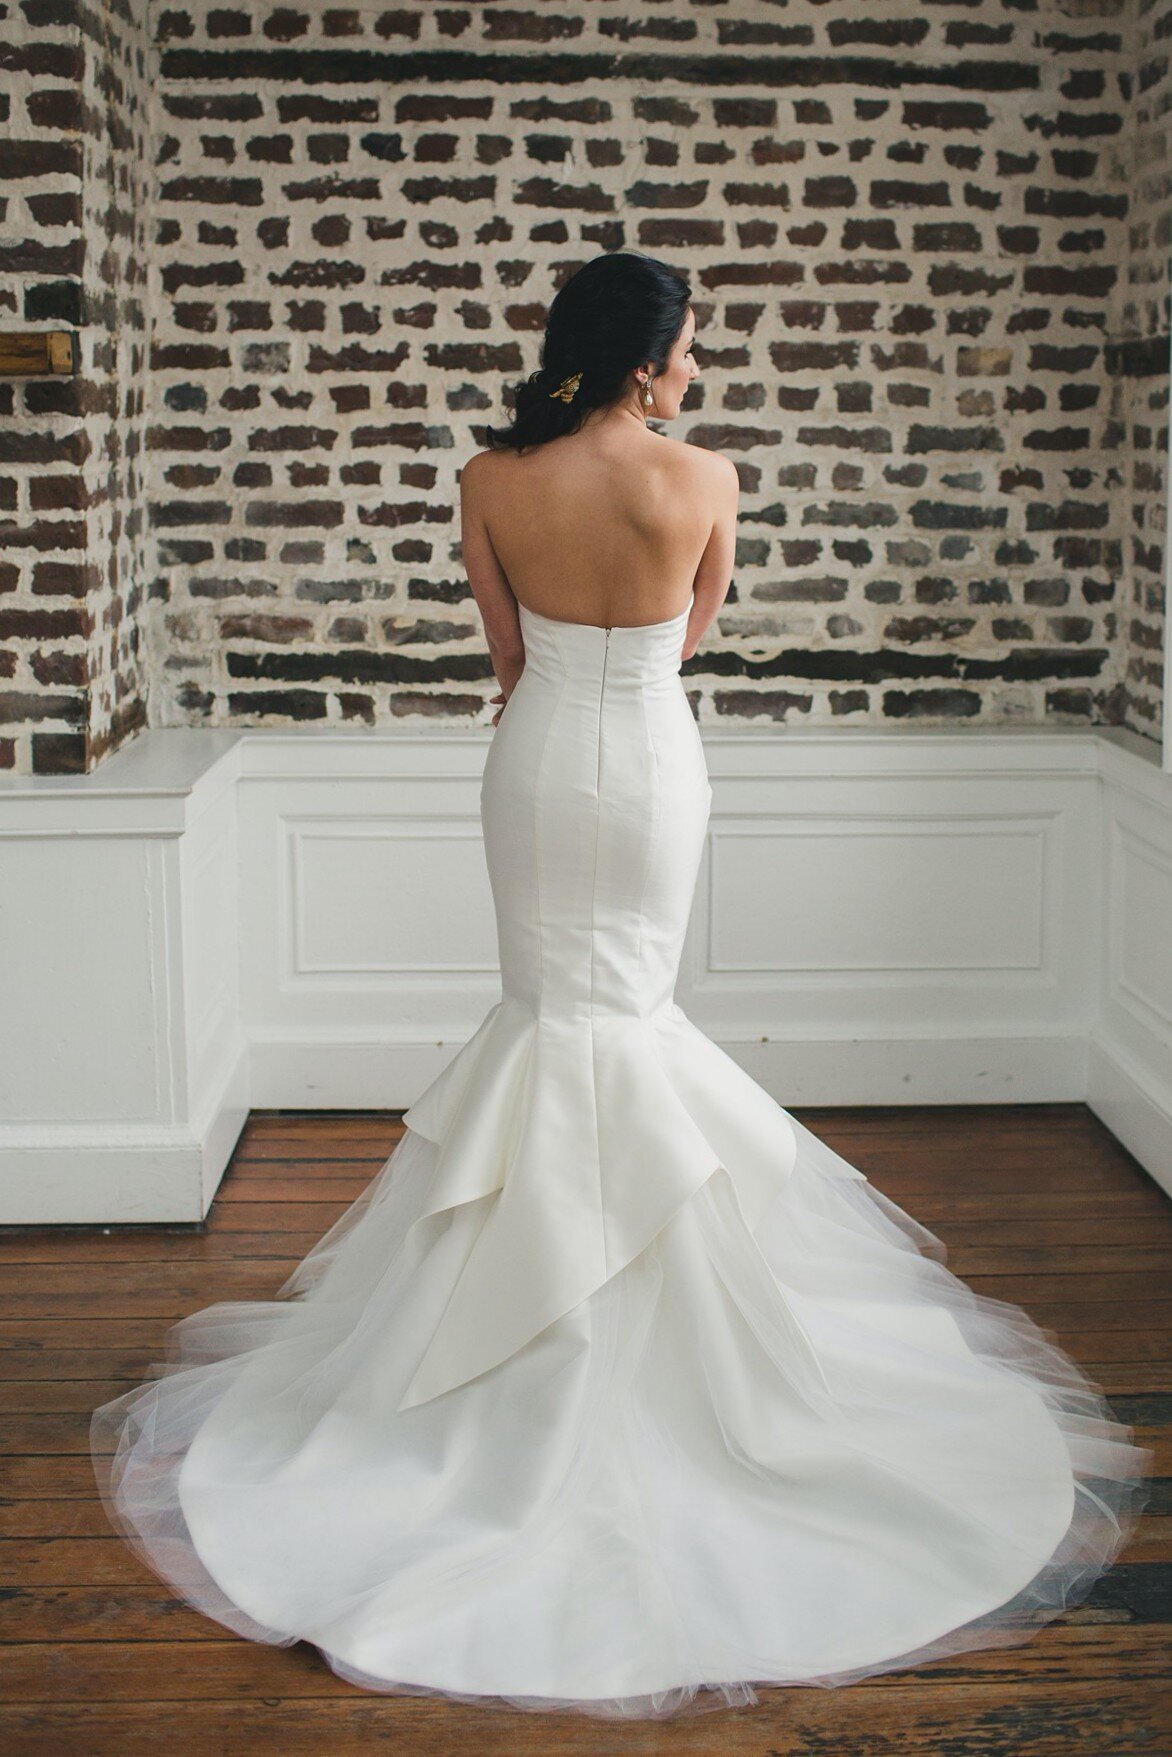 The back of the Amaryllis wedding dress reveals the unique and asymmetric details of the petal shapes that overlap onto the tulle mermaid skirt.